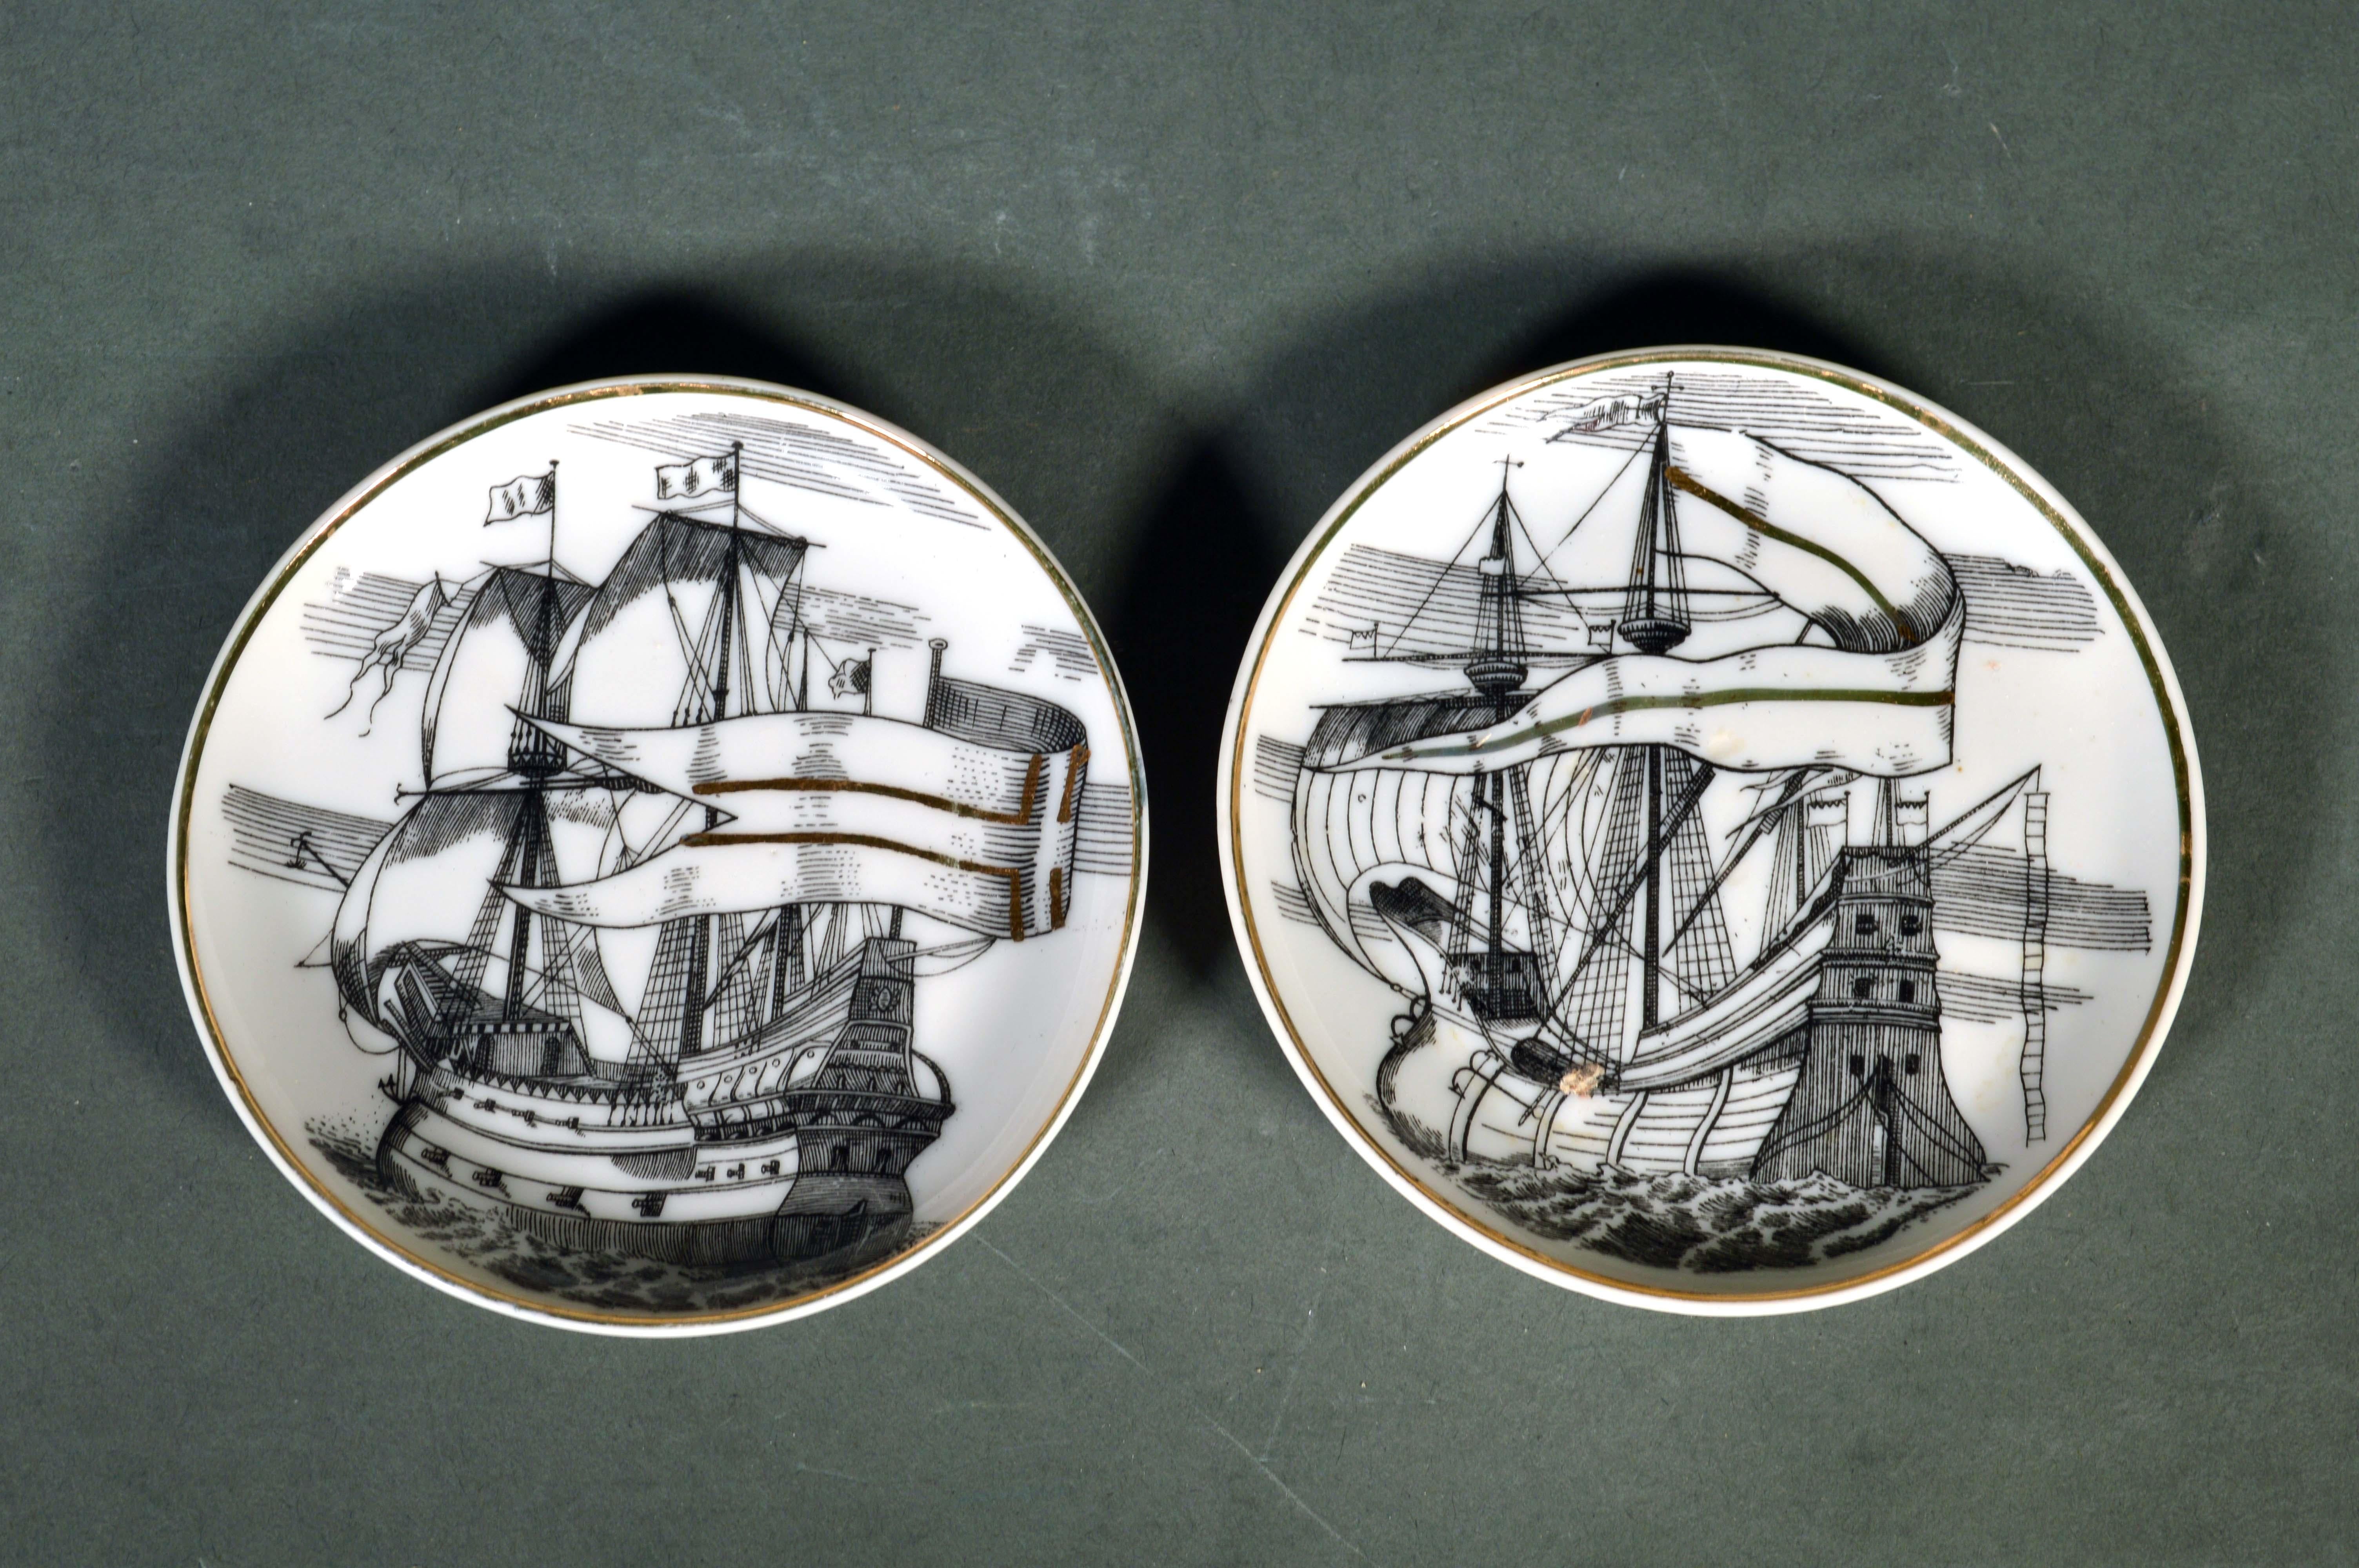 Mid-20th Century MCM Fornasetti-Style Coasters Tall Ships with Original Box, Velieri Pattern